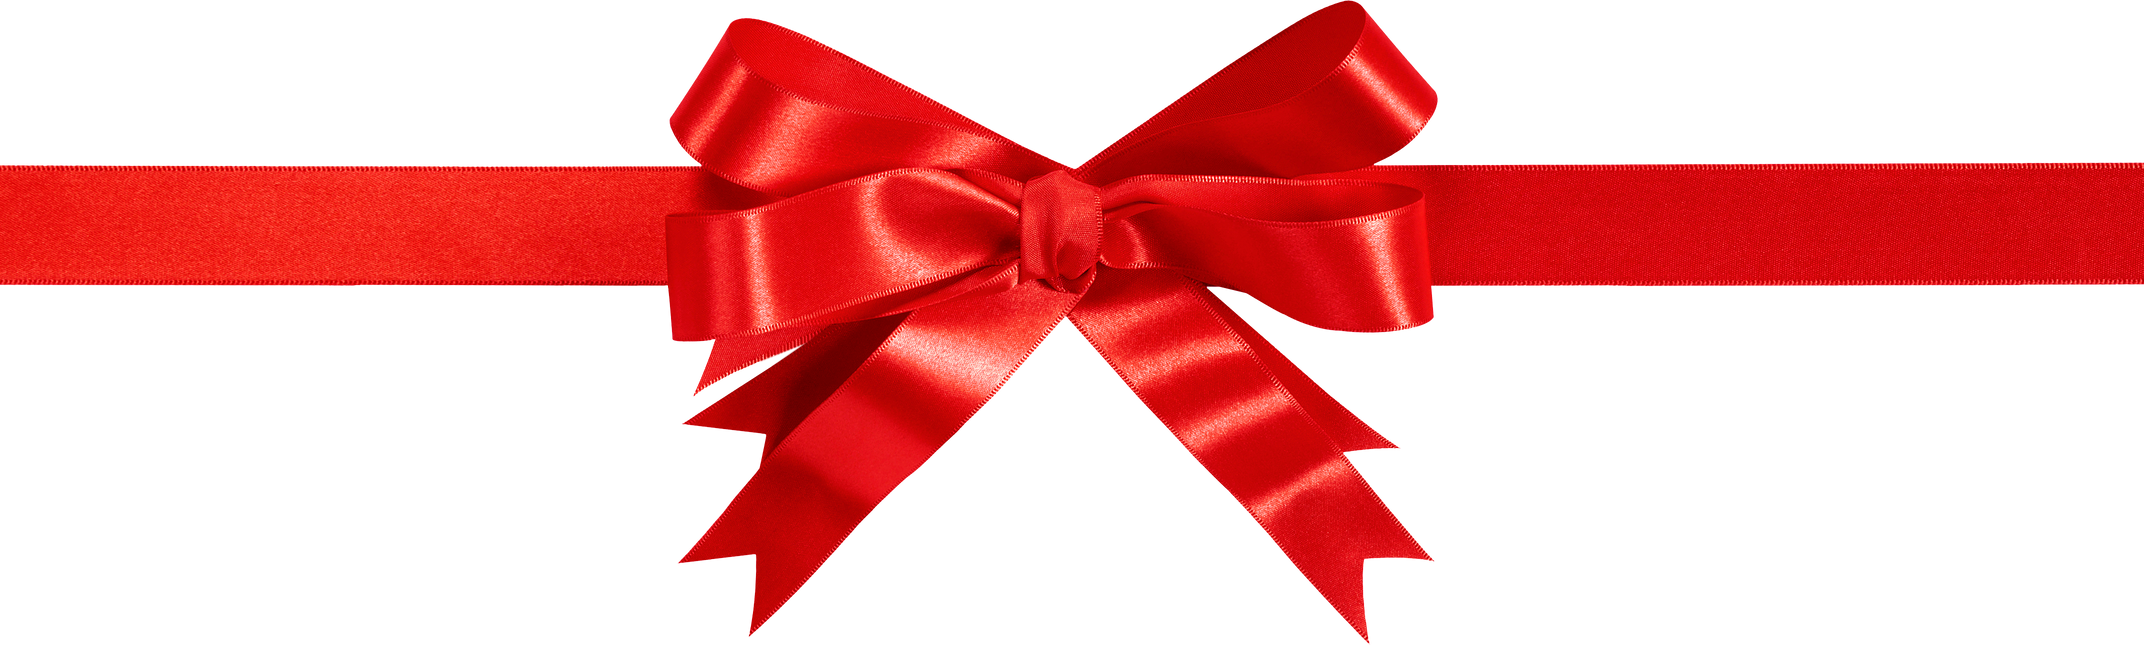 Red Gift Ribbon Bow 